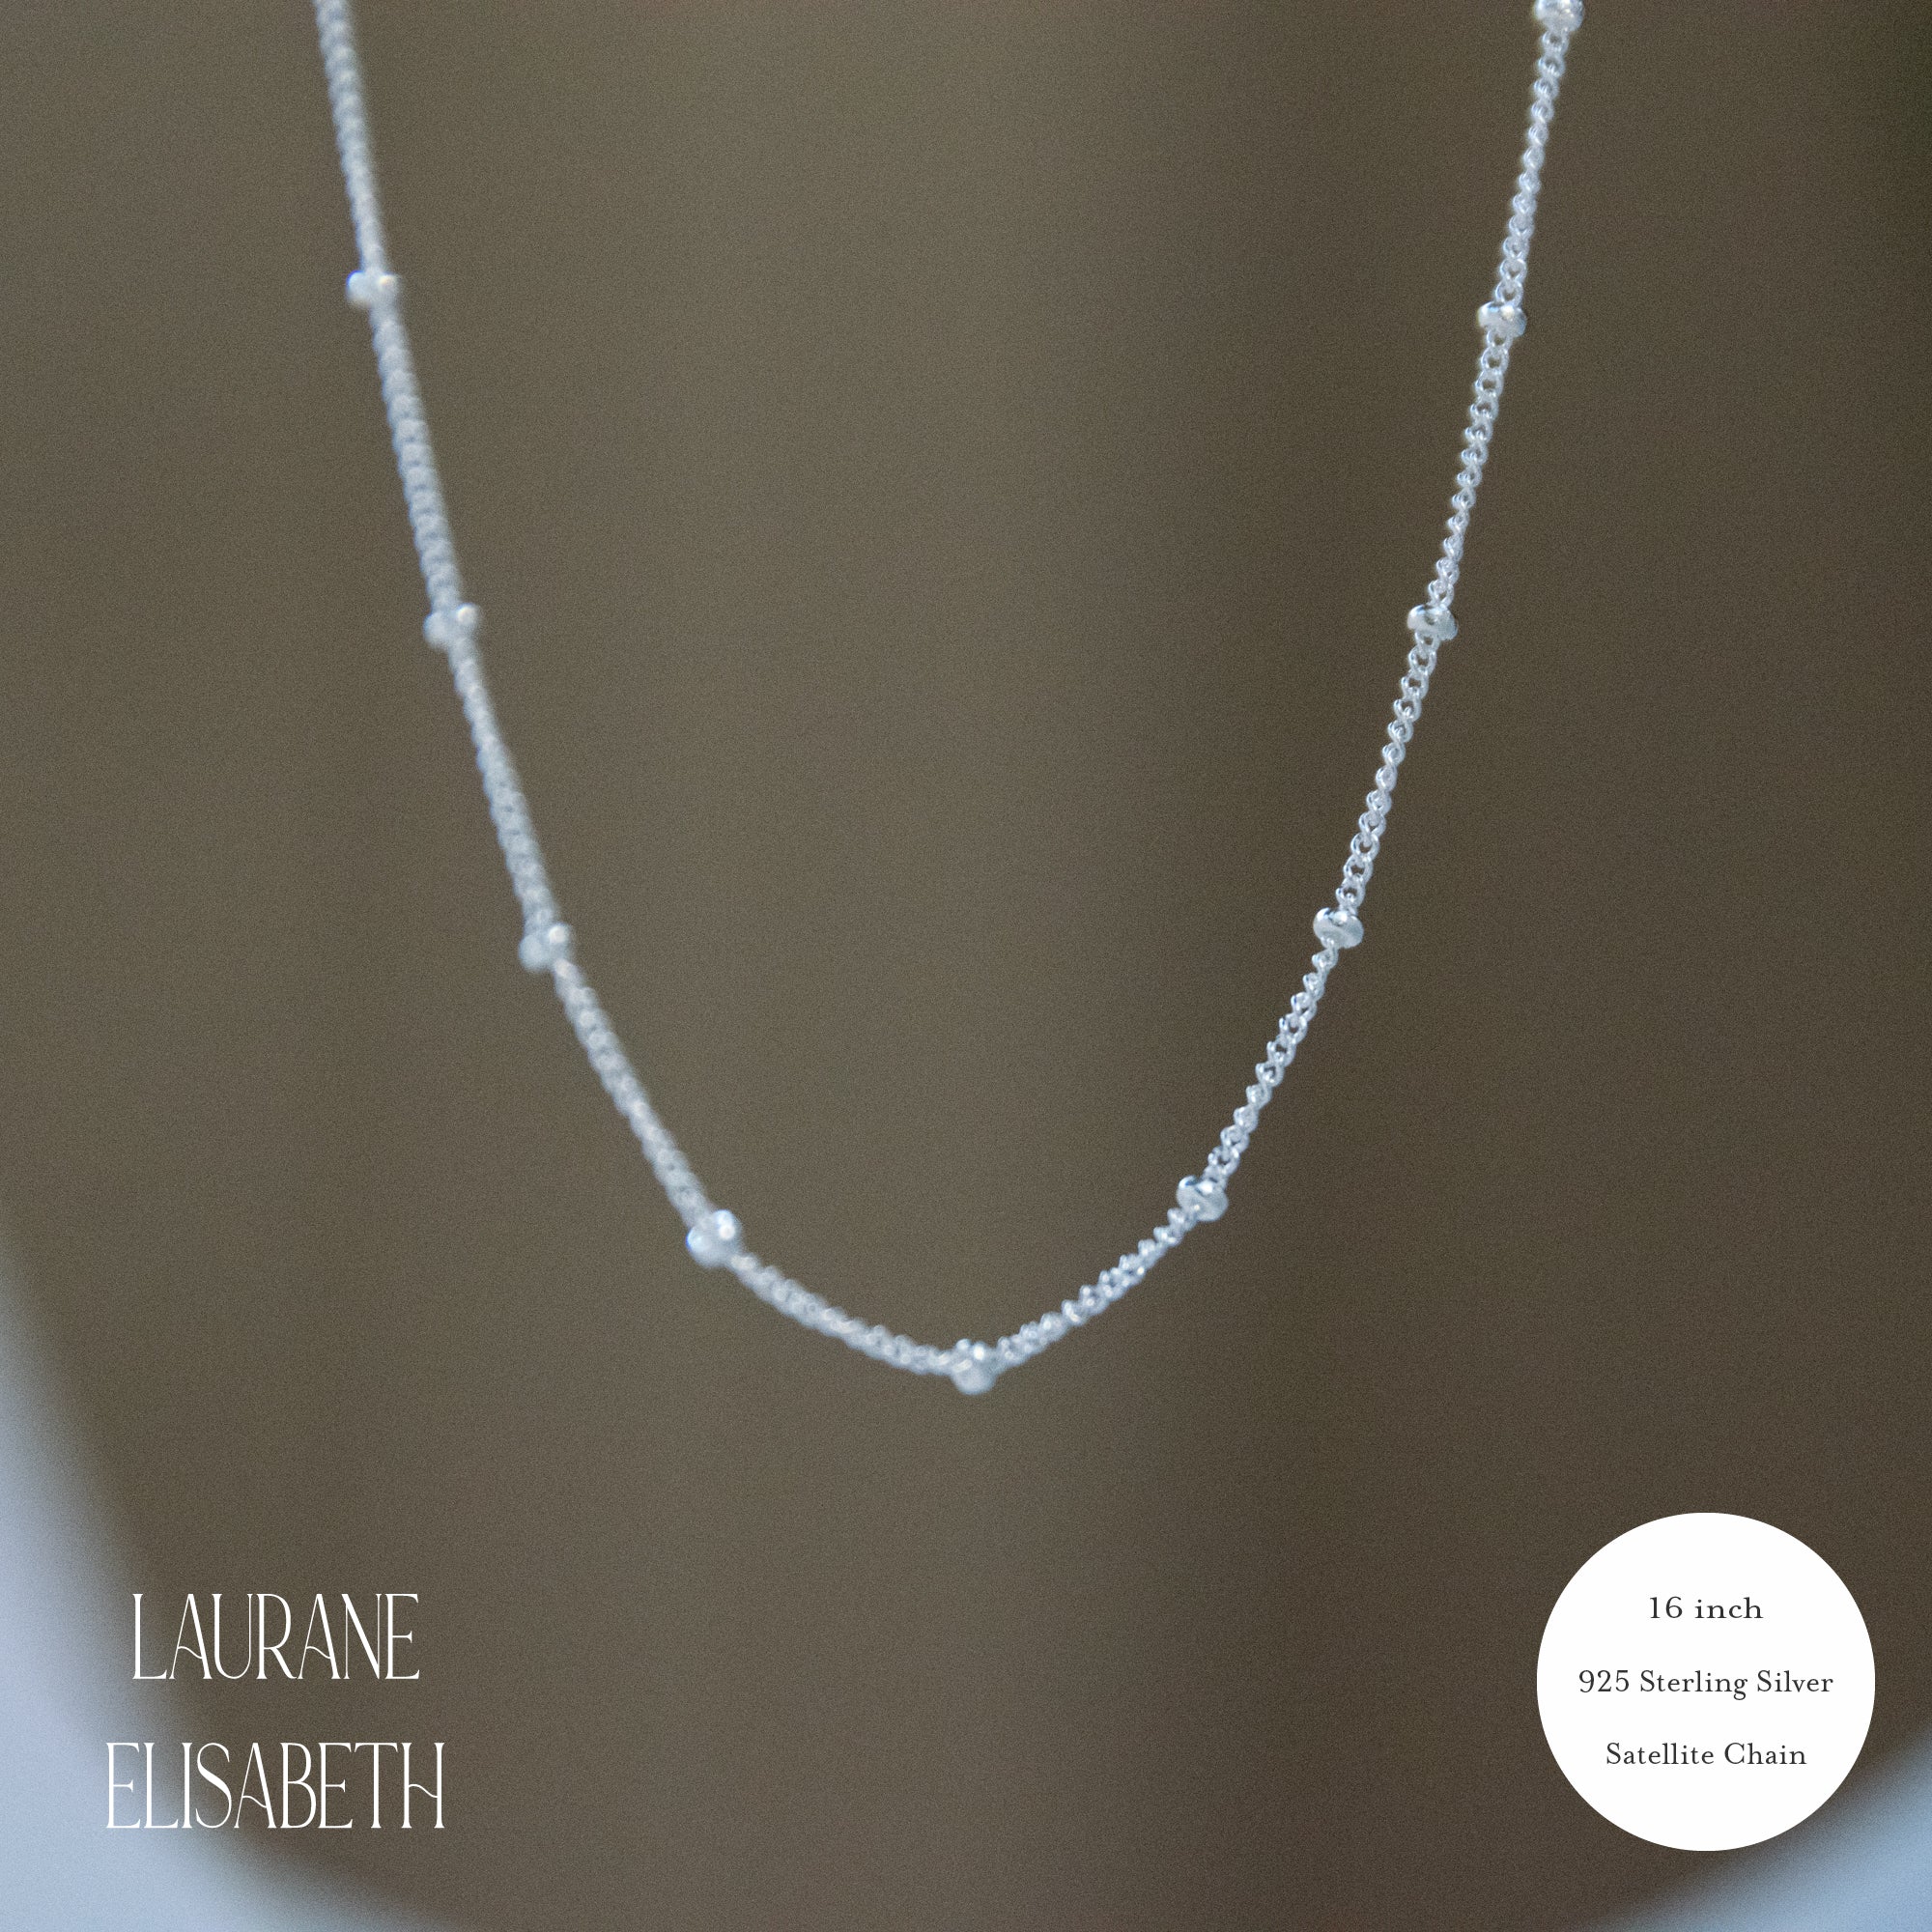  LANCHARMED 925 Sterling Silver Necklace Layering